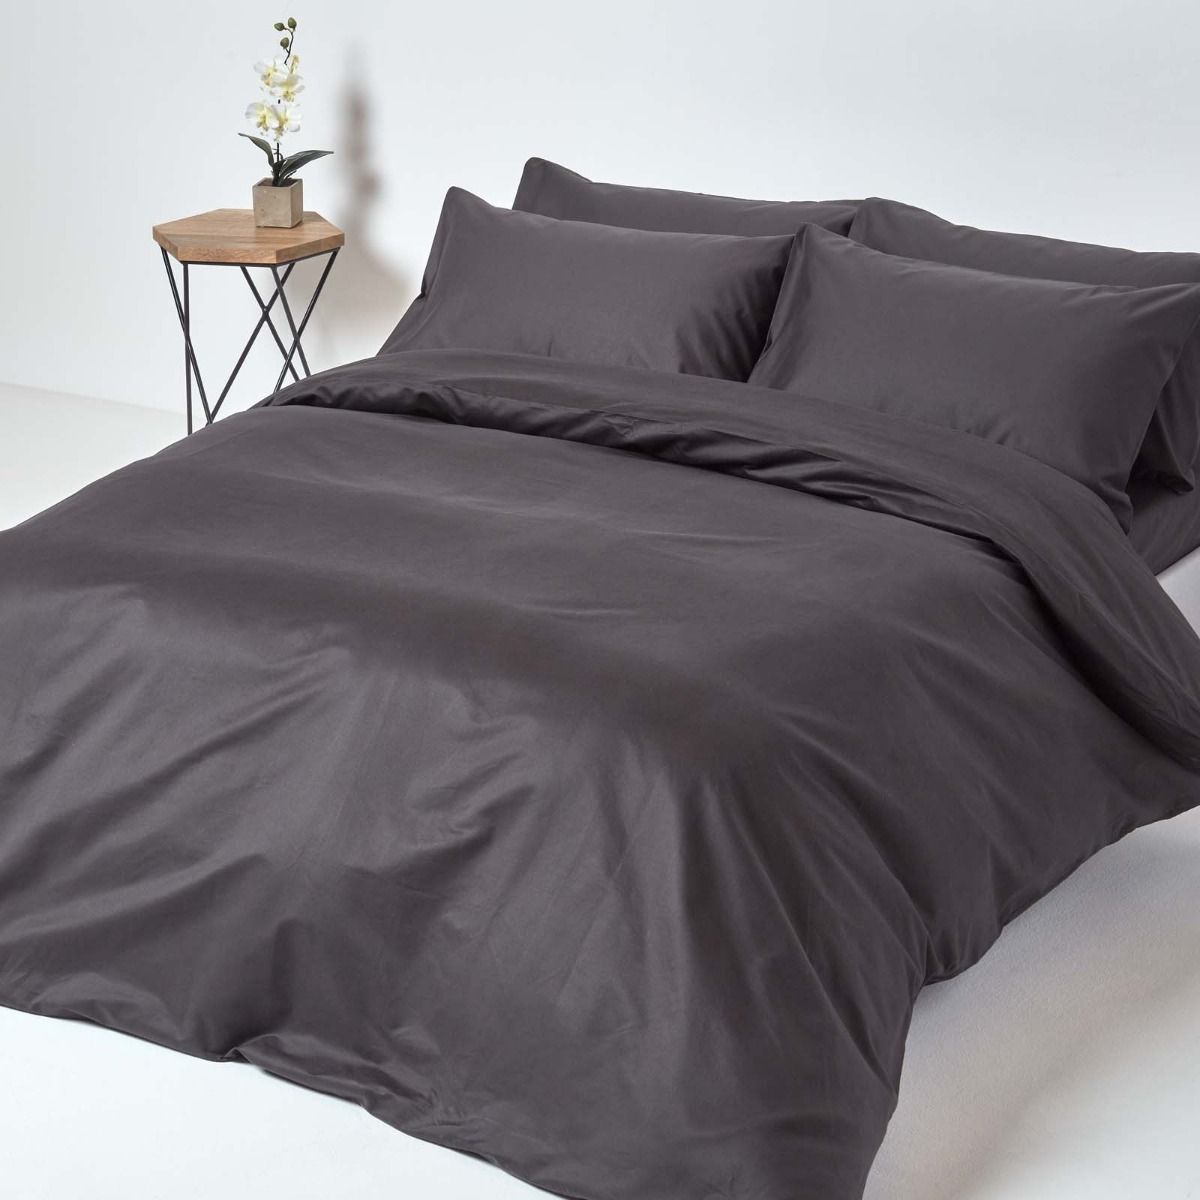 Dark Charcoal Grey Egyptian Cotton, Solid Grey Duvet Cover